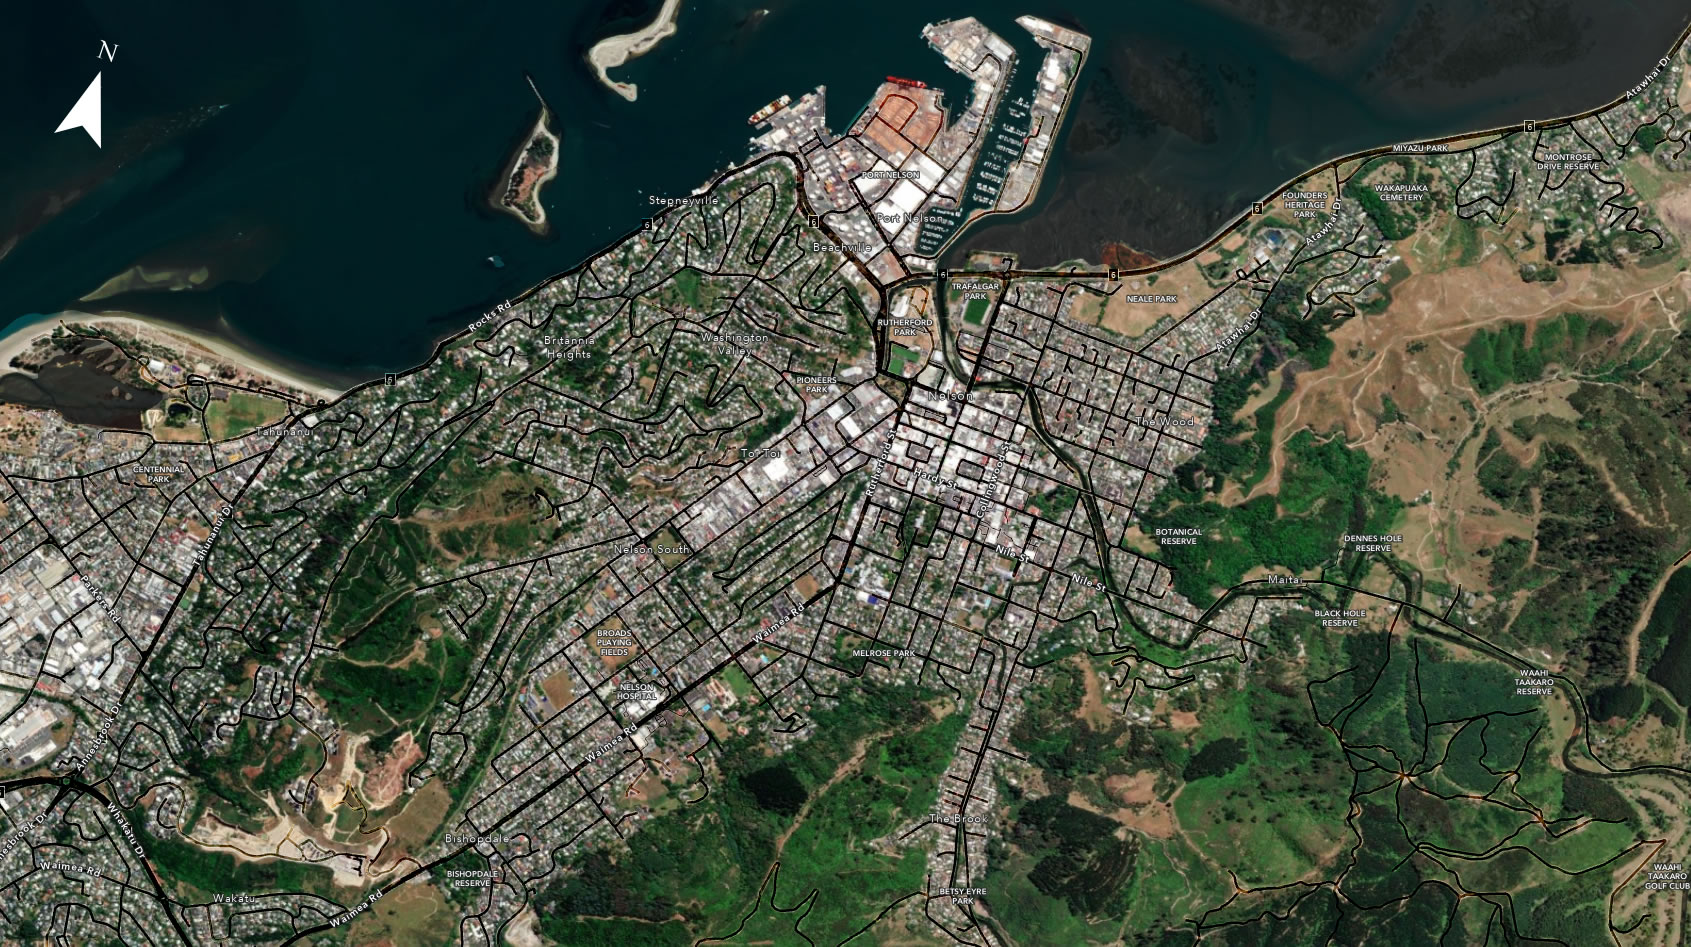 Port Nelson, New Zealand, local map.